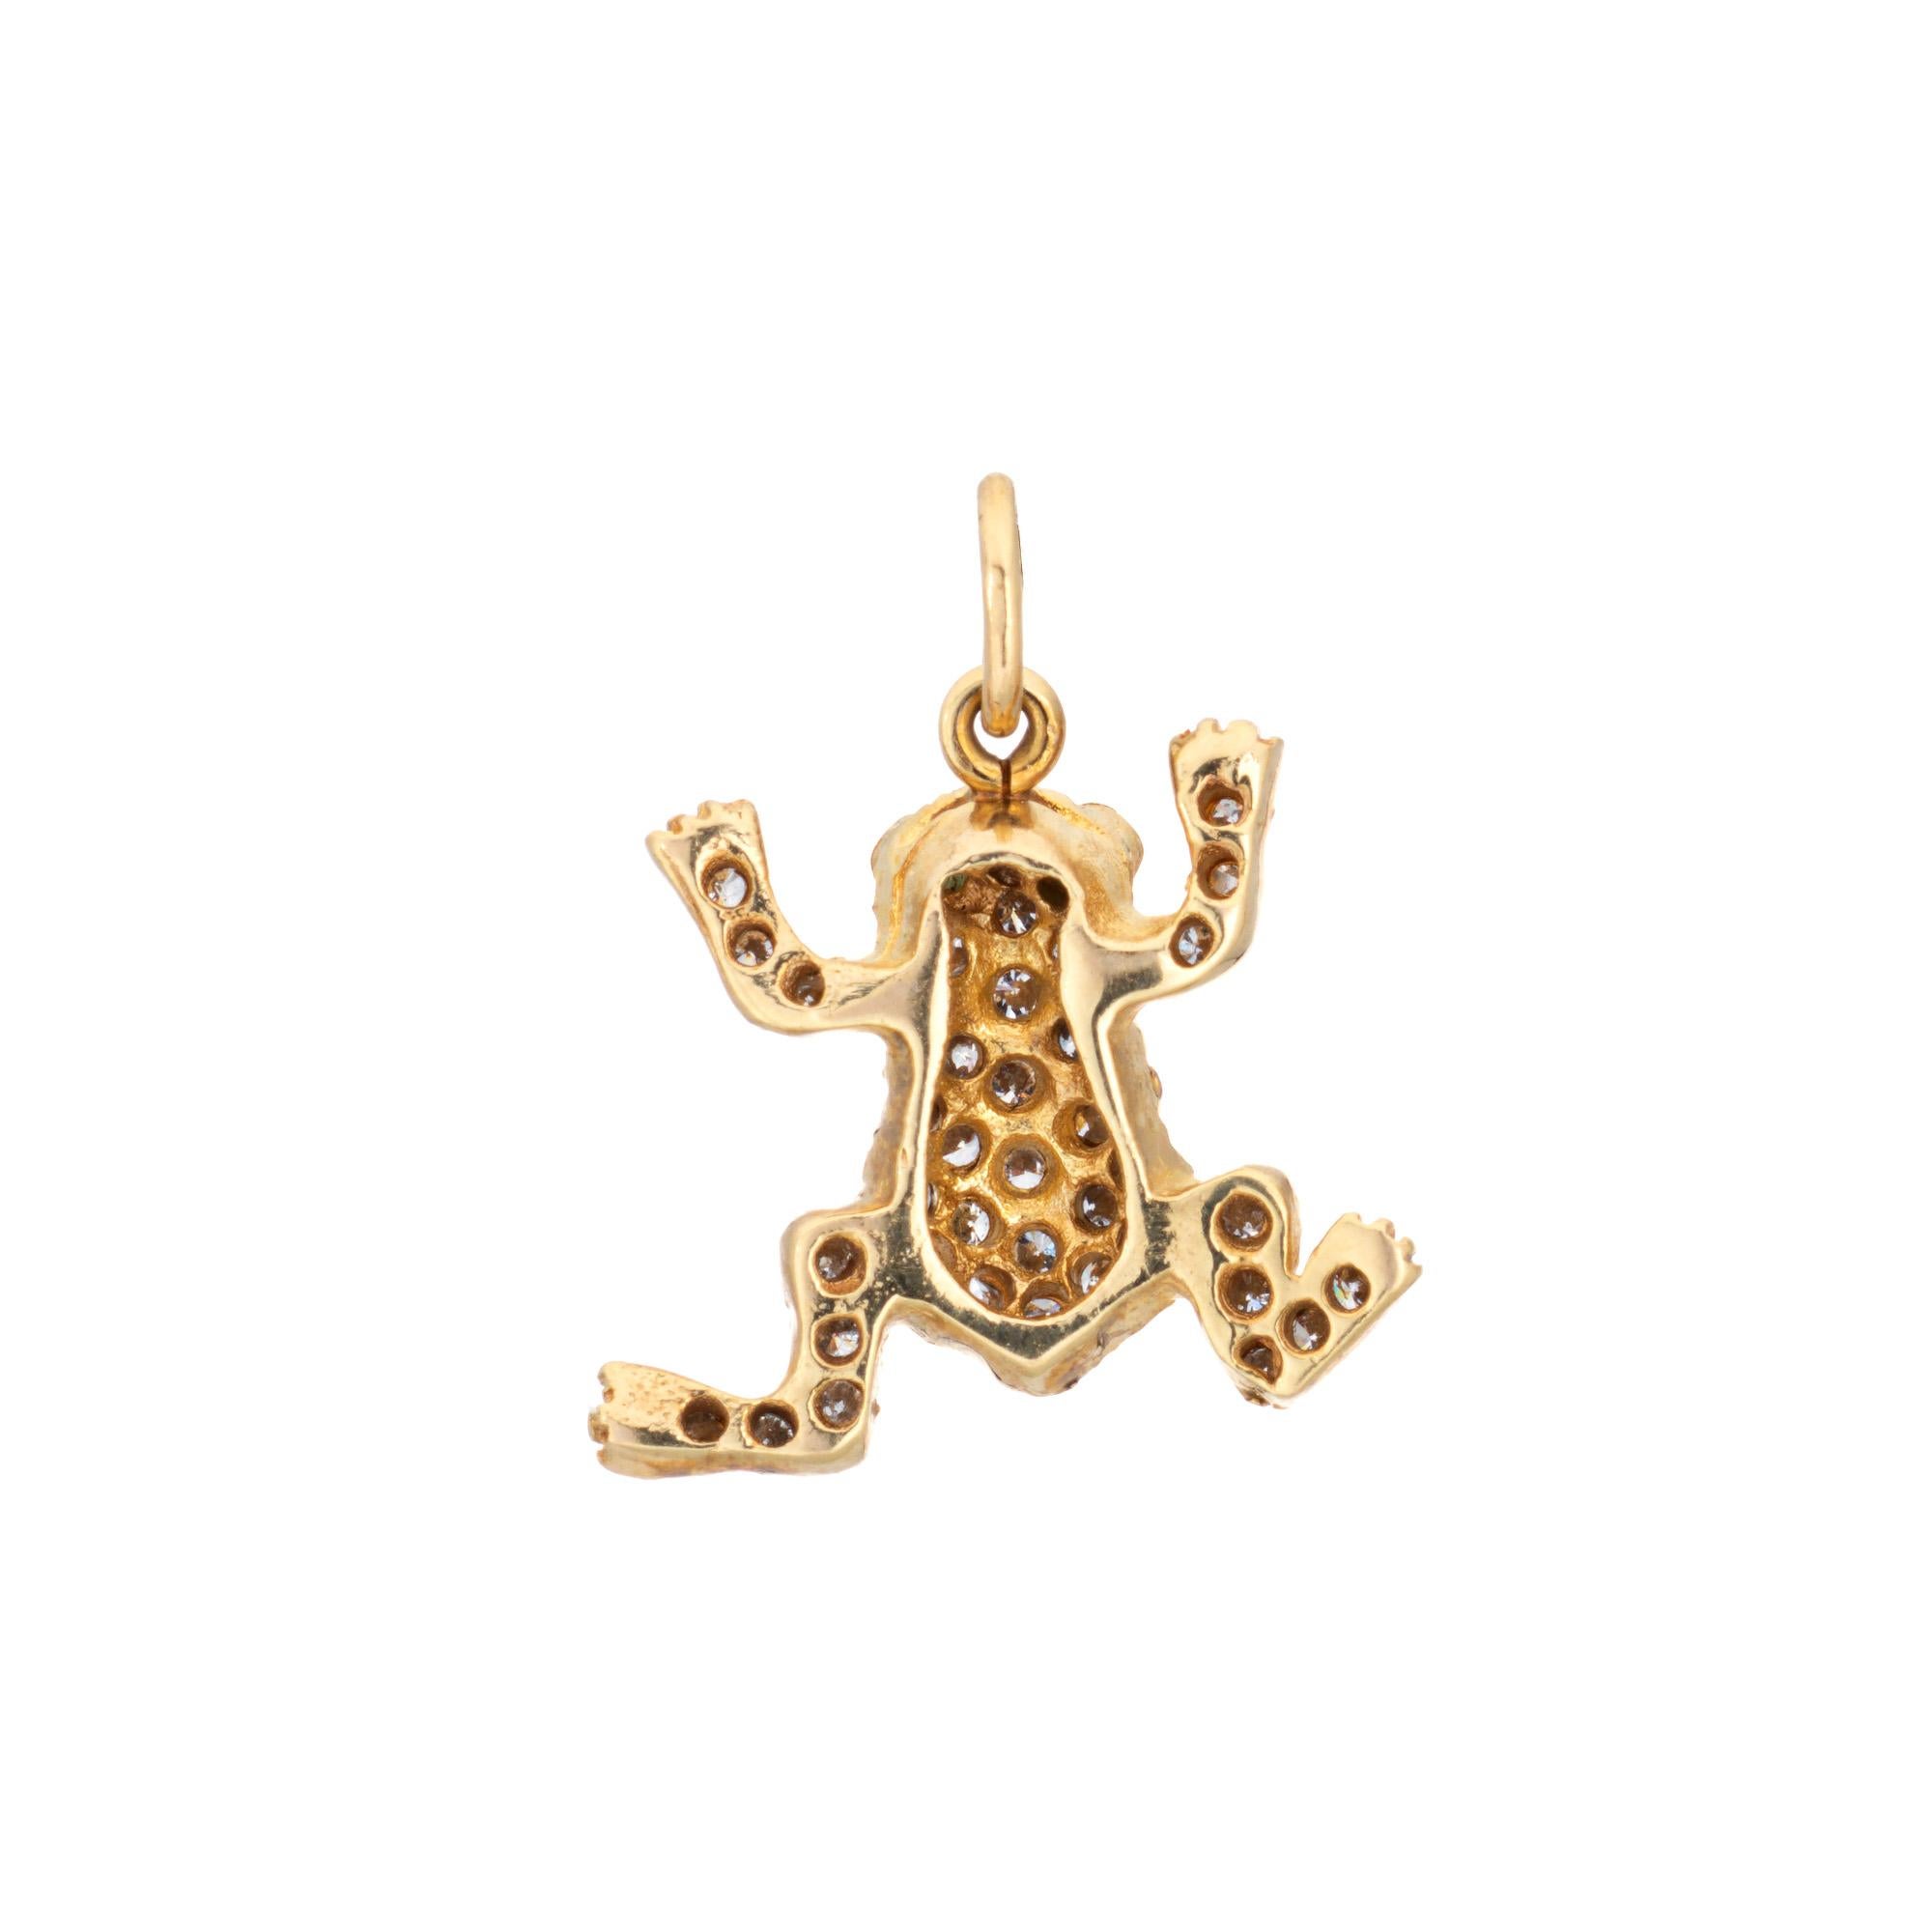 Round Cut Vintage Frog Charm Diamond 18k Yellow Gold Pendant Emerald Eyes Fine Jewelry For Sale